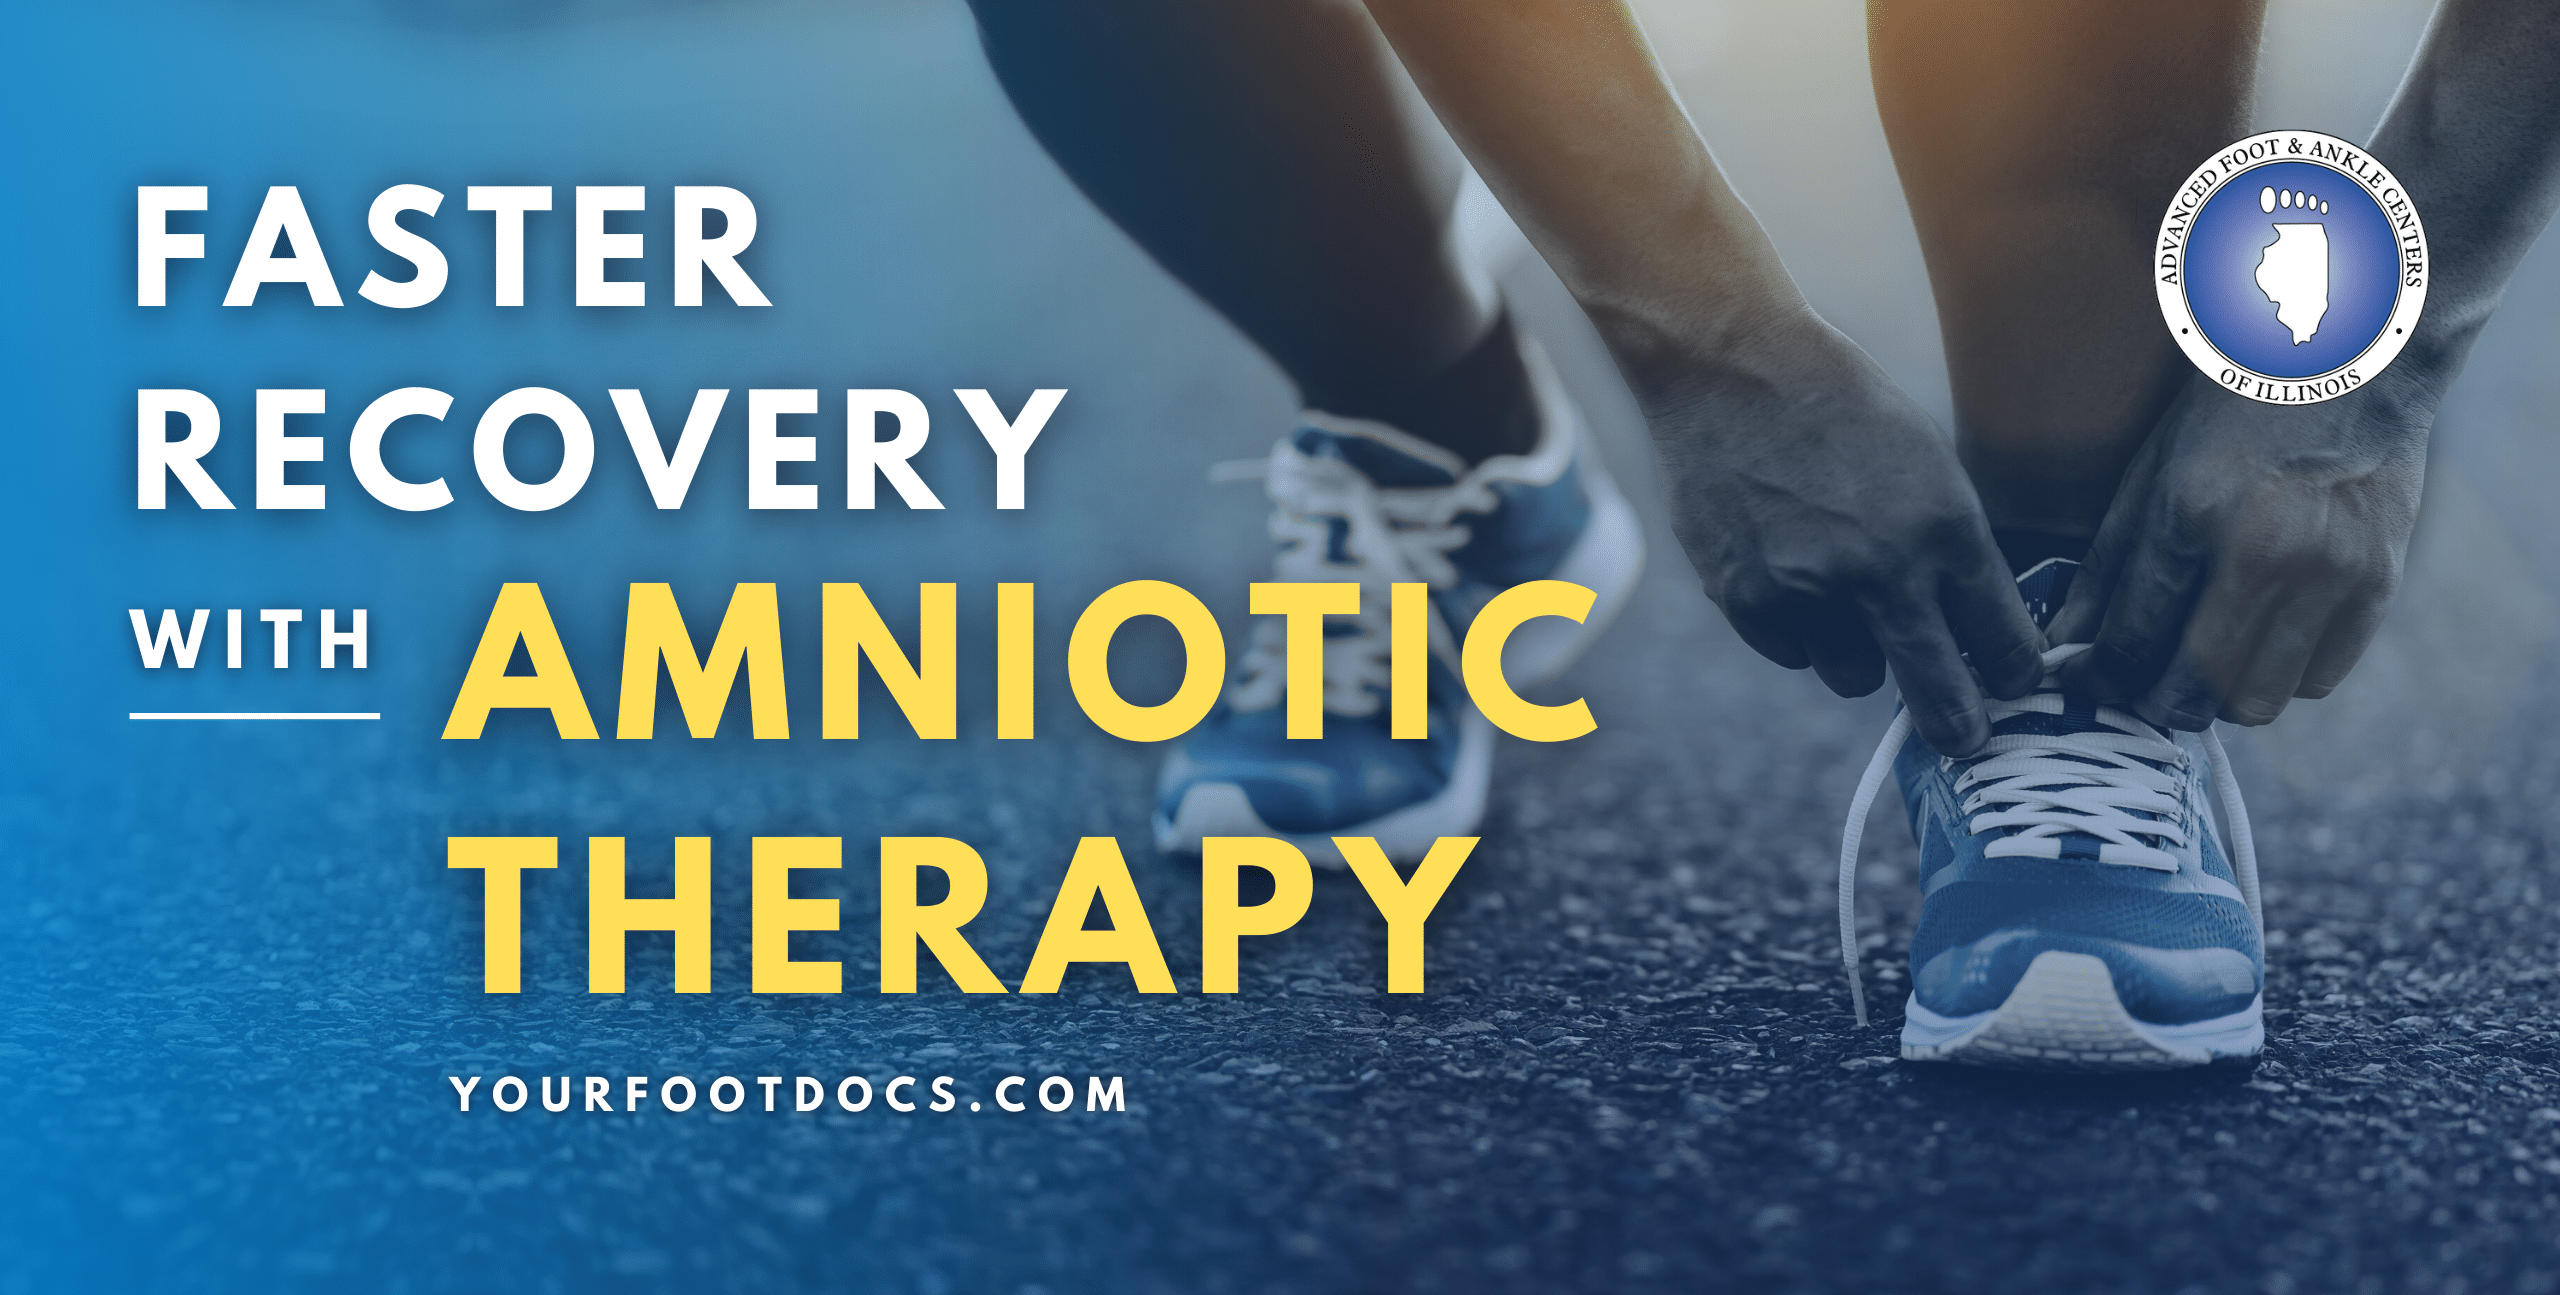 amniotic therapy